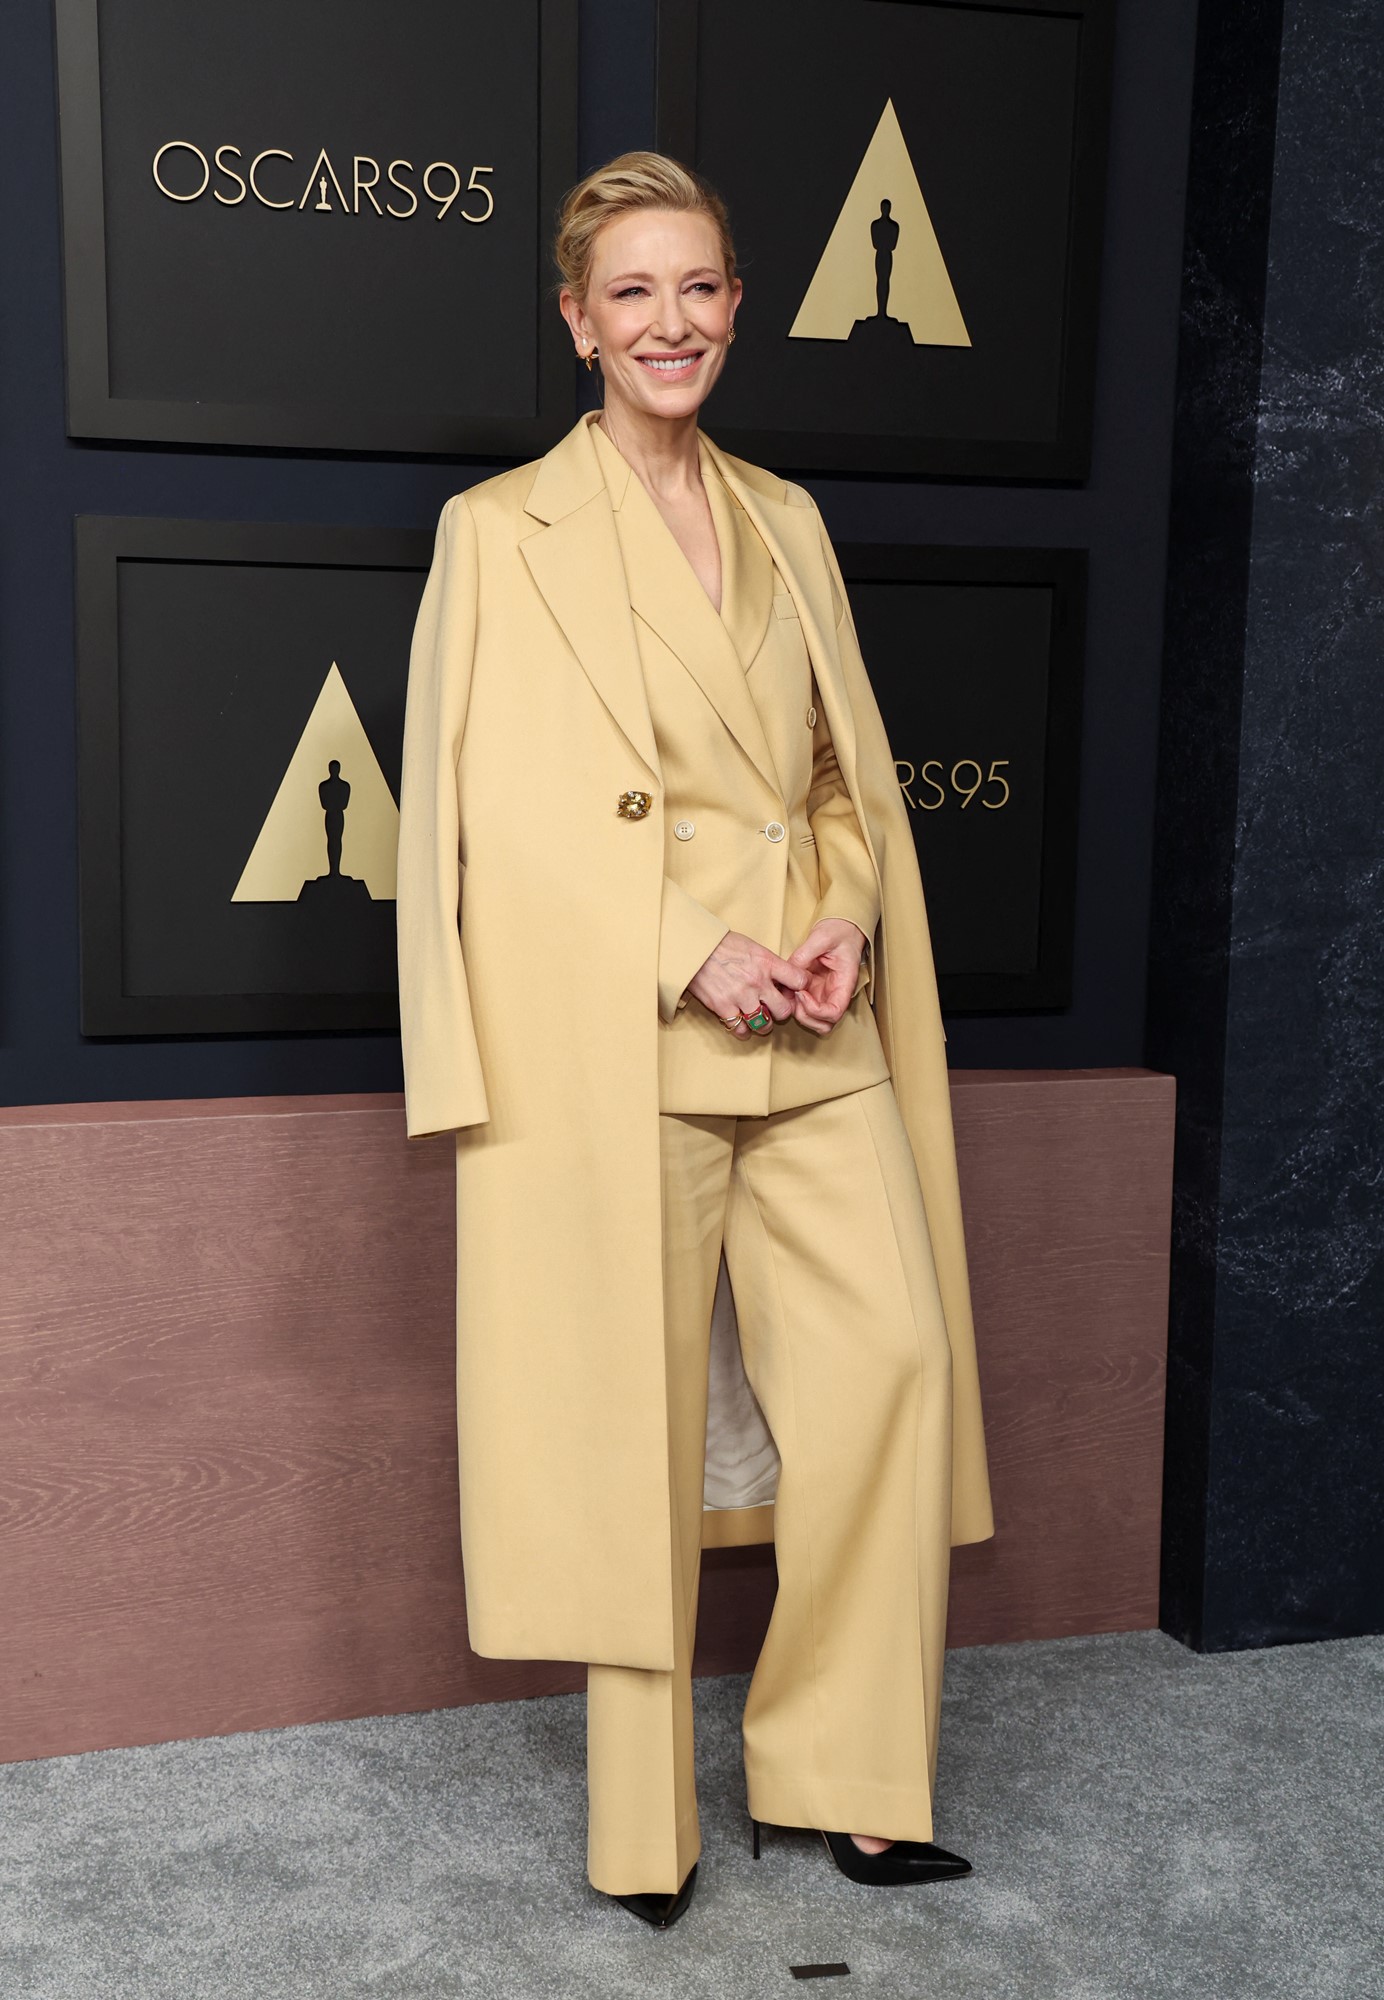 Cate smiles in a yellowy beige oversized suit.